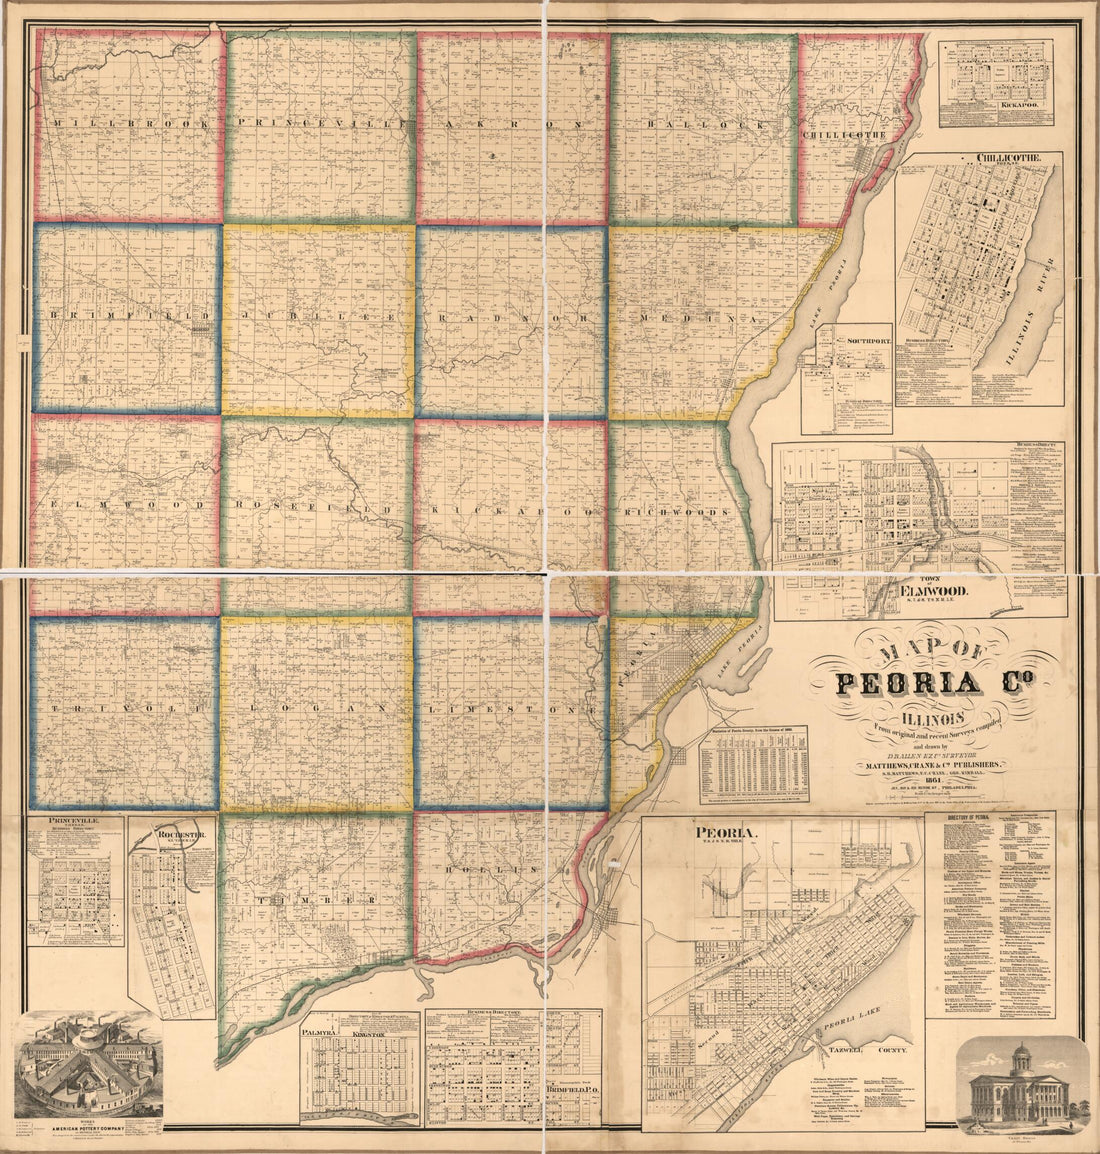 This old map of Map of Peoria Co., Illinois from 1861 was created by Daniel B. Allen in 1861